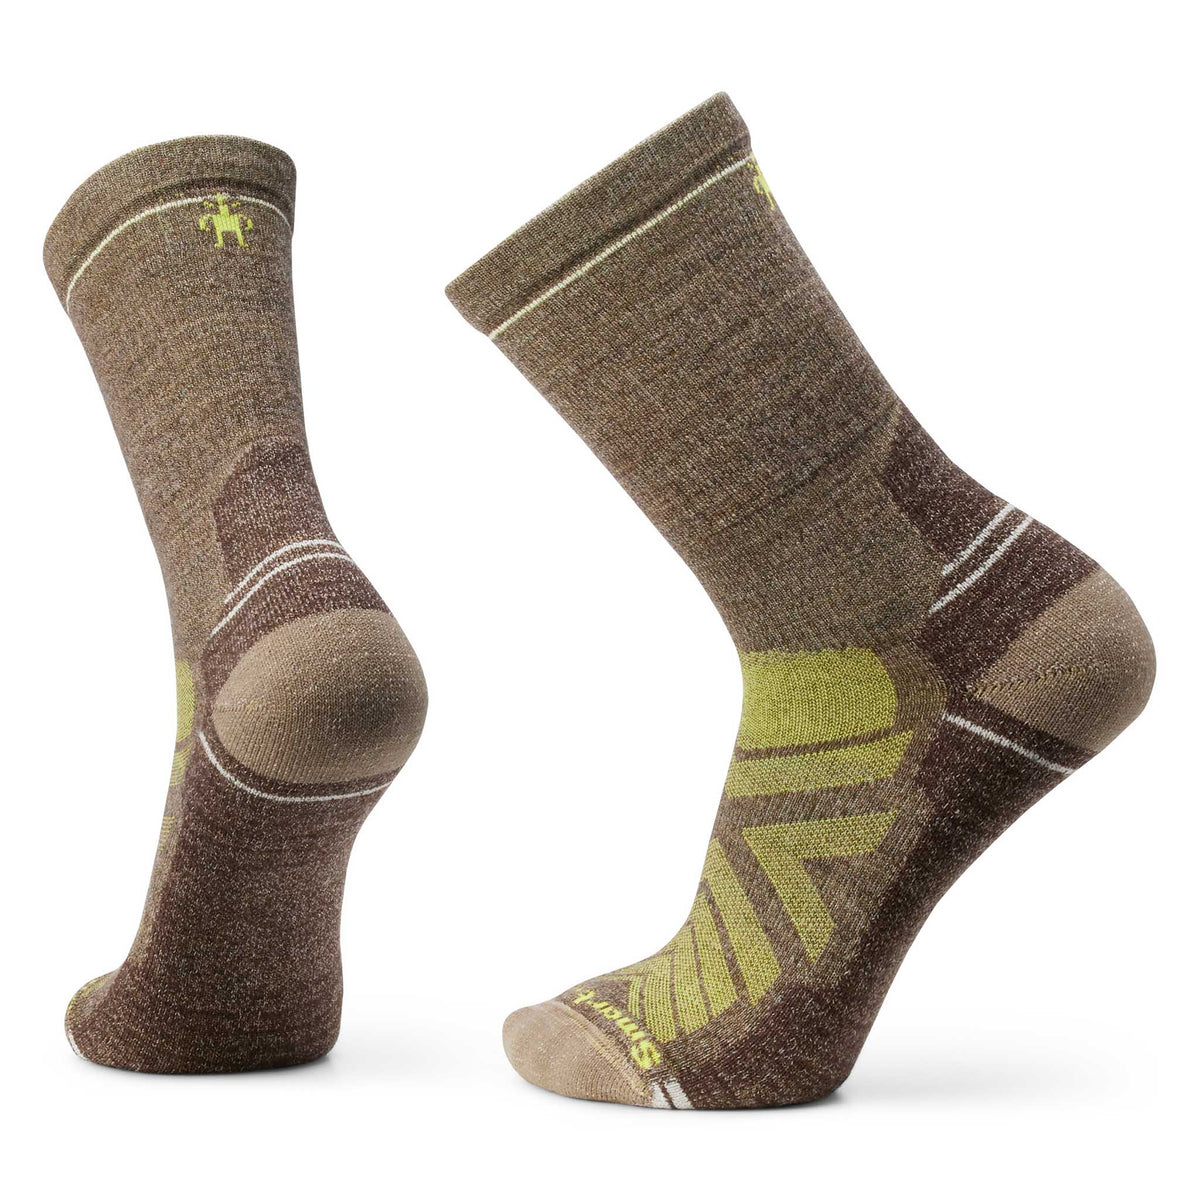 Smartwool Performance Hike Light Cushion chaussettes homme - olive militaire fossile